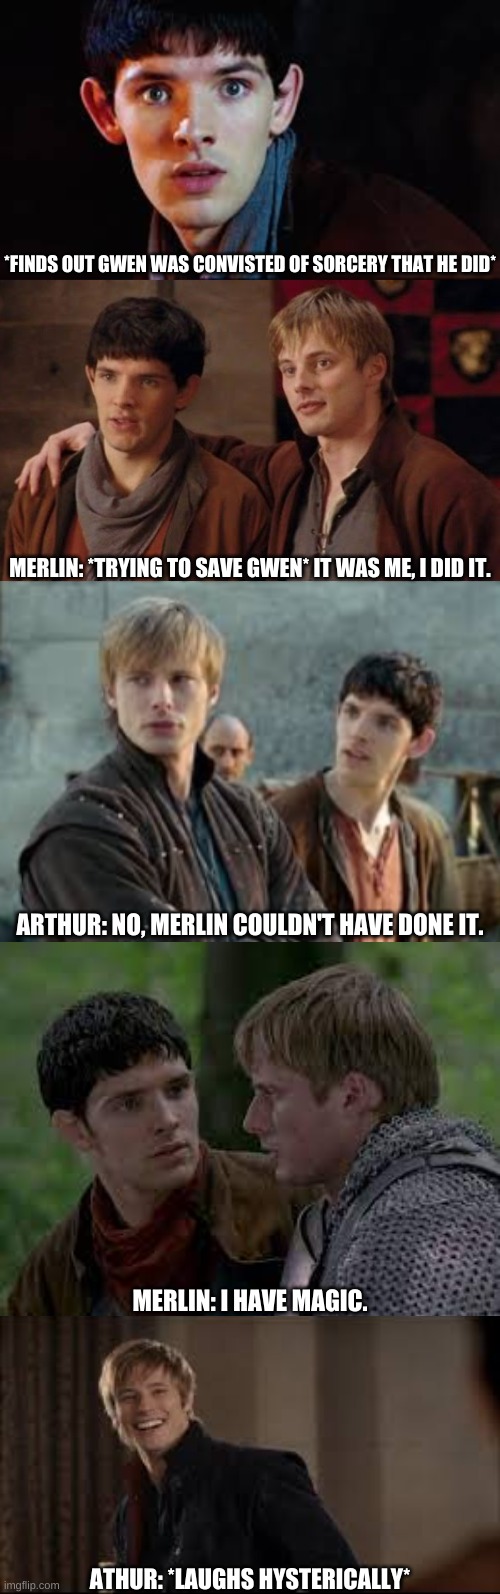 Arthur and Merlin | *FINDS OUT GWEN WAS CONVISTED OF SORCERY THAT HE DID*; MERLIN: *TRYING TO SAVE GWEN* IT WAS ME, I DID IT. ARTHUR: NO, MERLIN COULDN'T HAVE DONE IT. MERLIN: I HAVE MAGIC. ATHUR: *LAUGHS HYSTERICALLY* | image tagged in arthur,merlin,magic | made w/ Imgflip meme maker